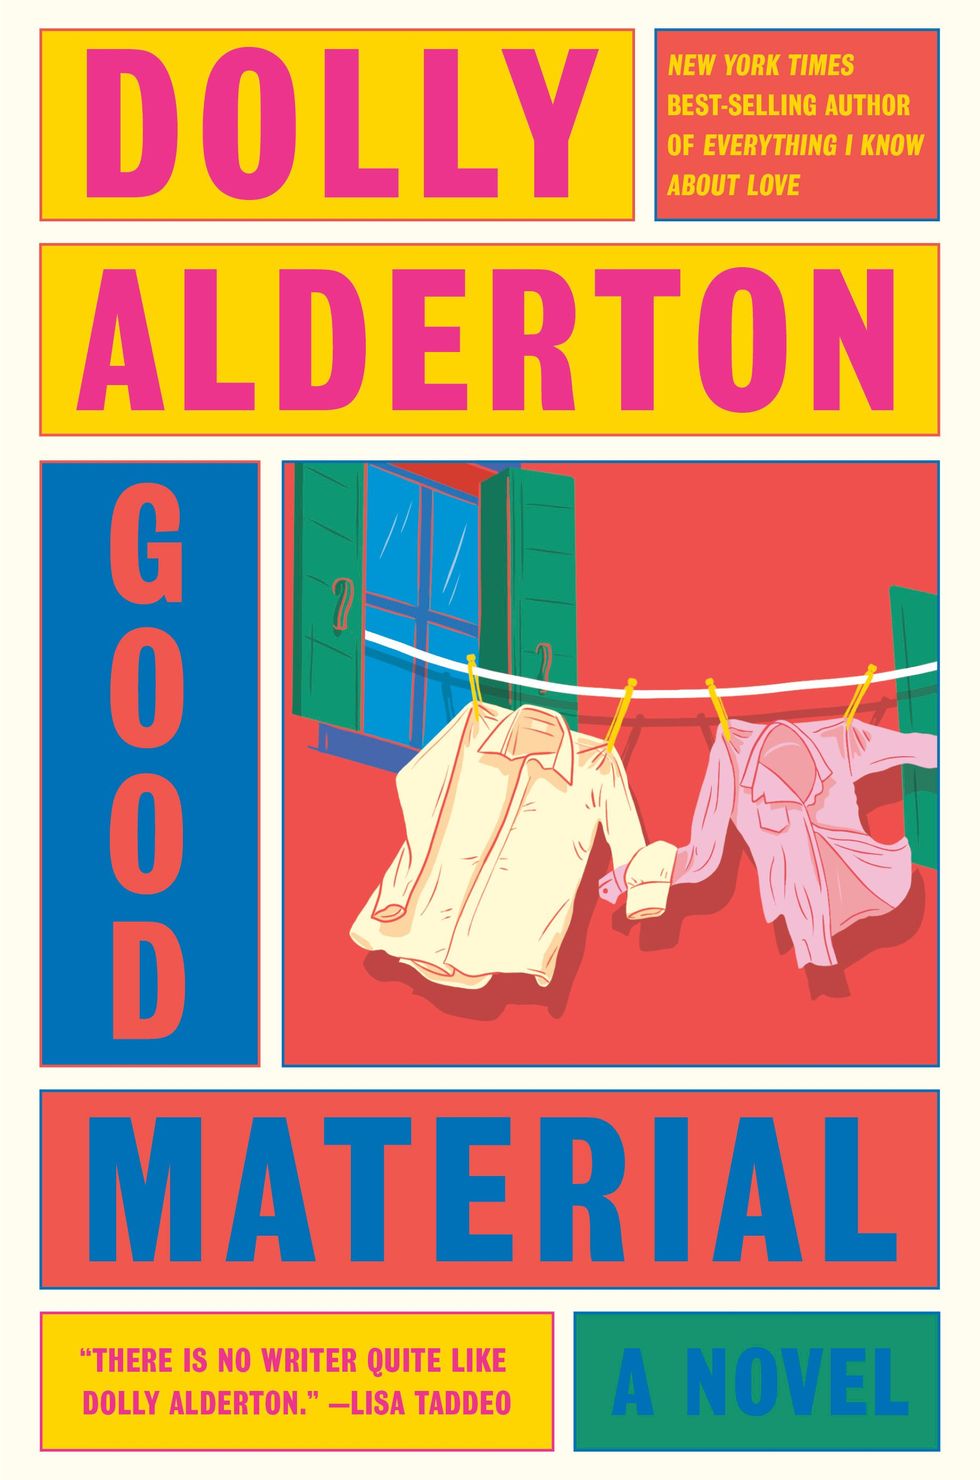 'Good Material' by Dolly Alderton